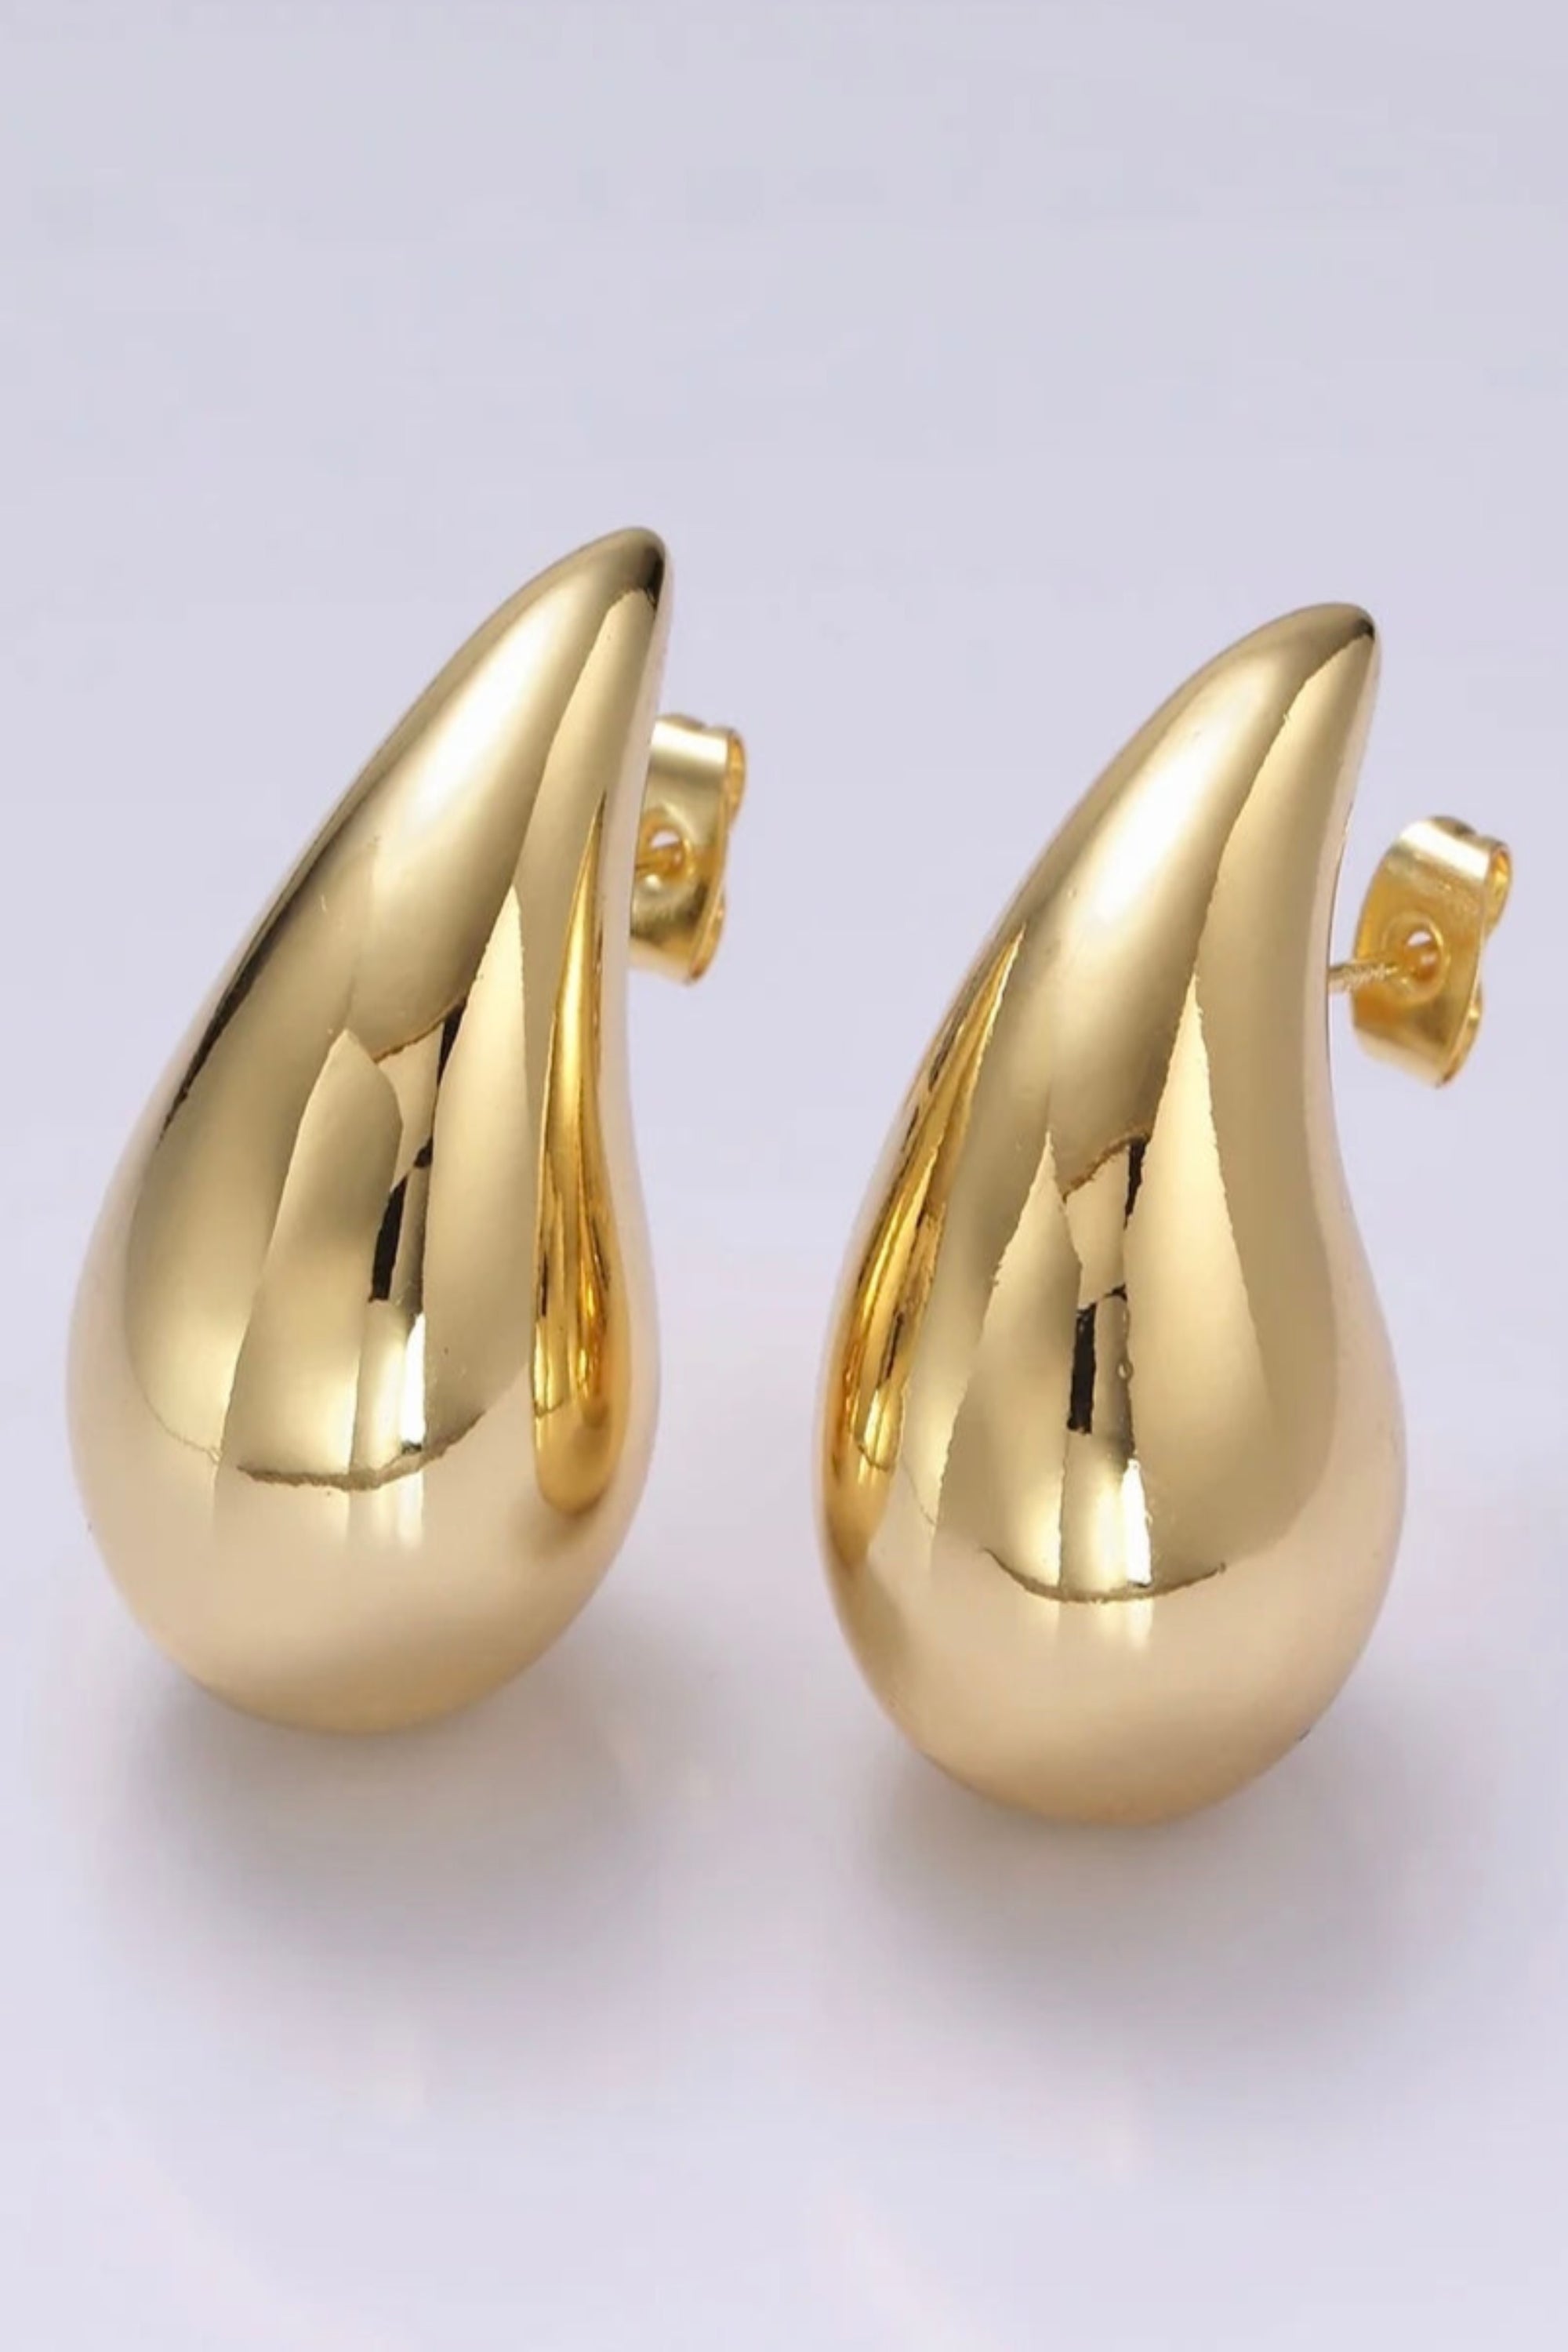 "Gold Filled Tear drop earrings Kylie Jenner style dupe chunky earring."